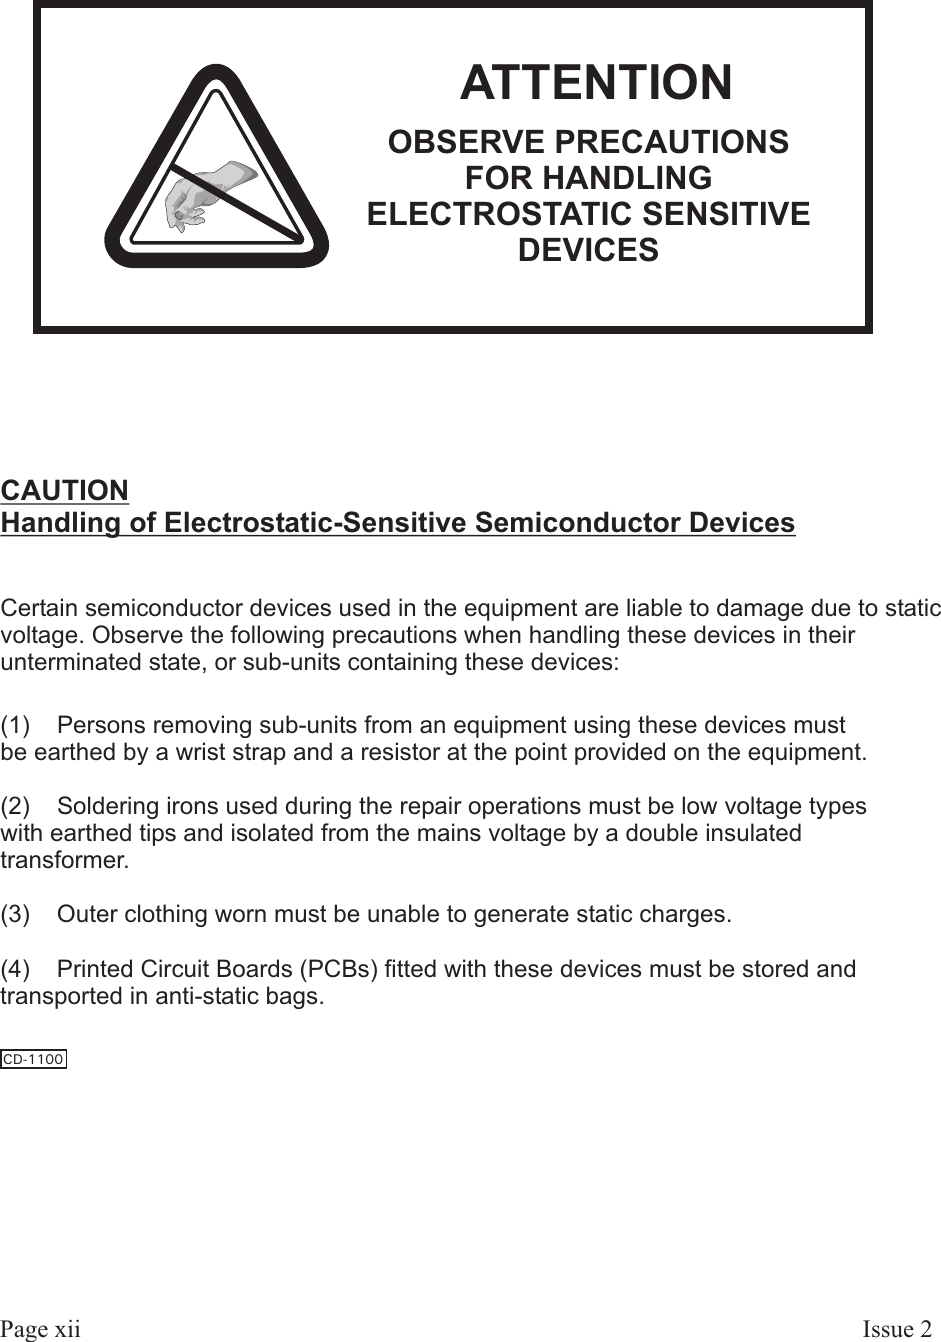 Page xii Is sue  2ATTENTIONOBSERVE PRECAUTIONSFOR HANDLINGELECTROSTATIC SENSITIVEDEVICESCAUTIONHandling of Electrostatic-Sensitive Semiconductor DevicesCertain semiconductor devices used in the equipment are liable to damage due to staticvoltage. Observe the following precautions when handling these devices in theirunterminated state, or sub-units containing these devices:(1)    Persons removing sub-units from an equipment using these devices mustbe earthed by a wrist strap and a resistor at the point provided on the equipment.(2)    Soldering irons used during the repair operations must be low voltage typeswith earthed tips and isolated from the mains voltage by a double insulatedtransformer.(3)    Outer clothing worn must be unable to generate static charges.(4)    Printed Circuit Boards (PCBs) fitted with these devices must be stored andtransported in anti-static bags.CD-1100